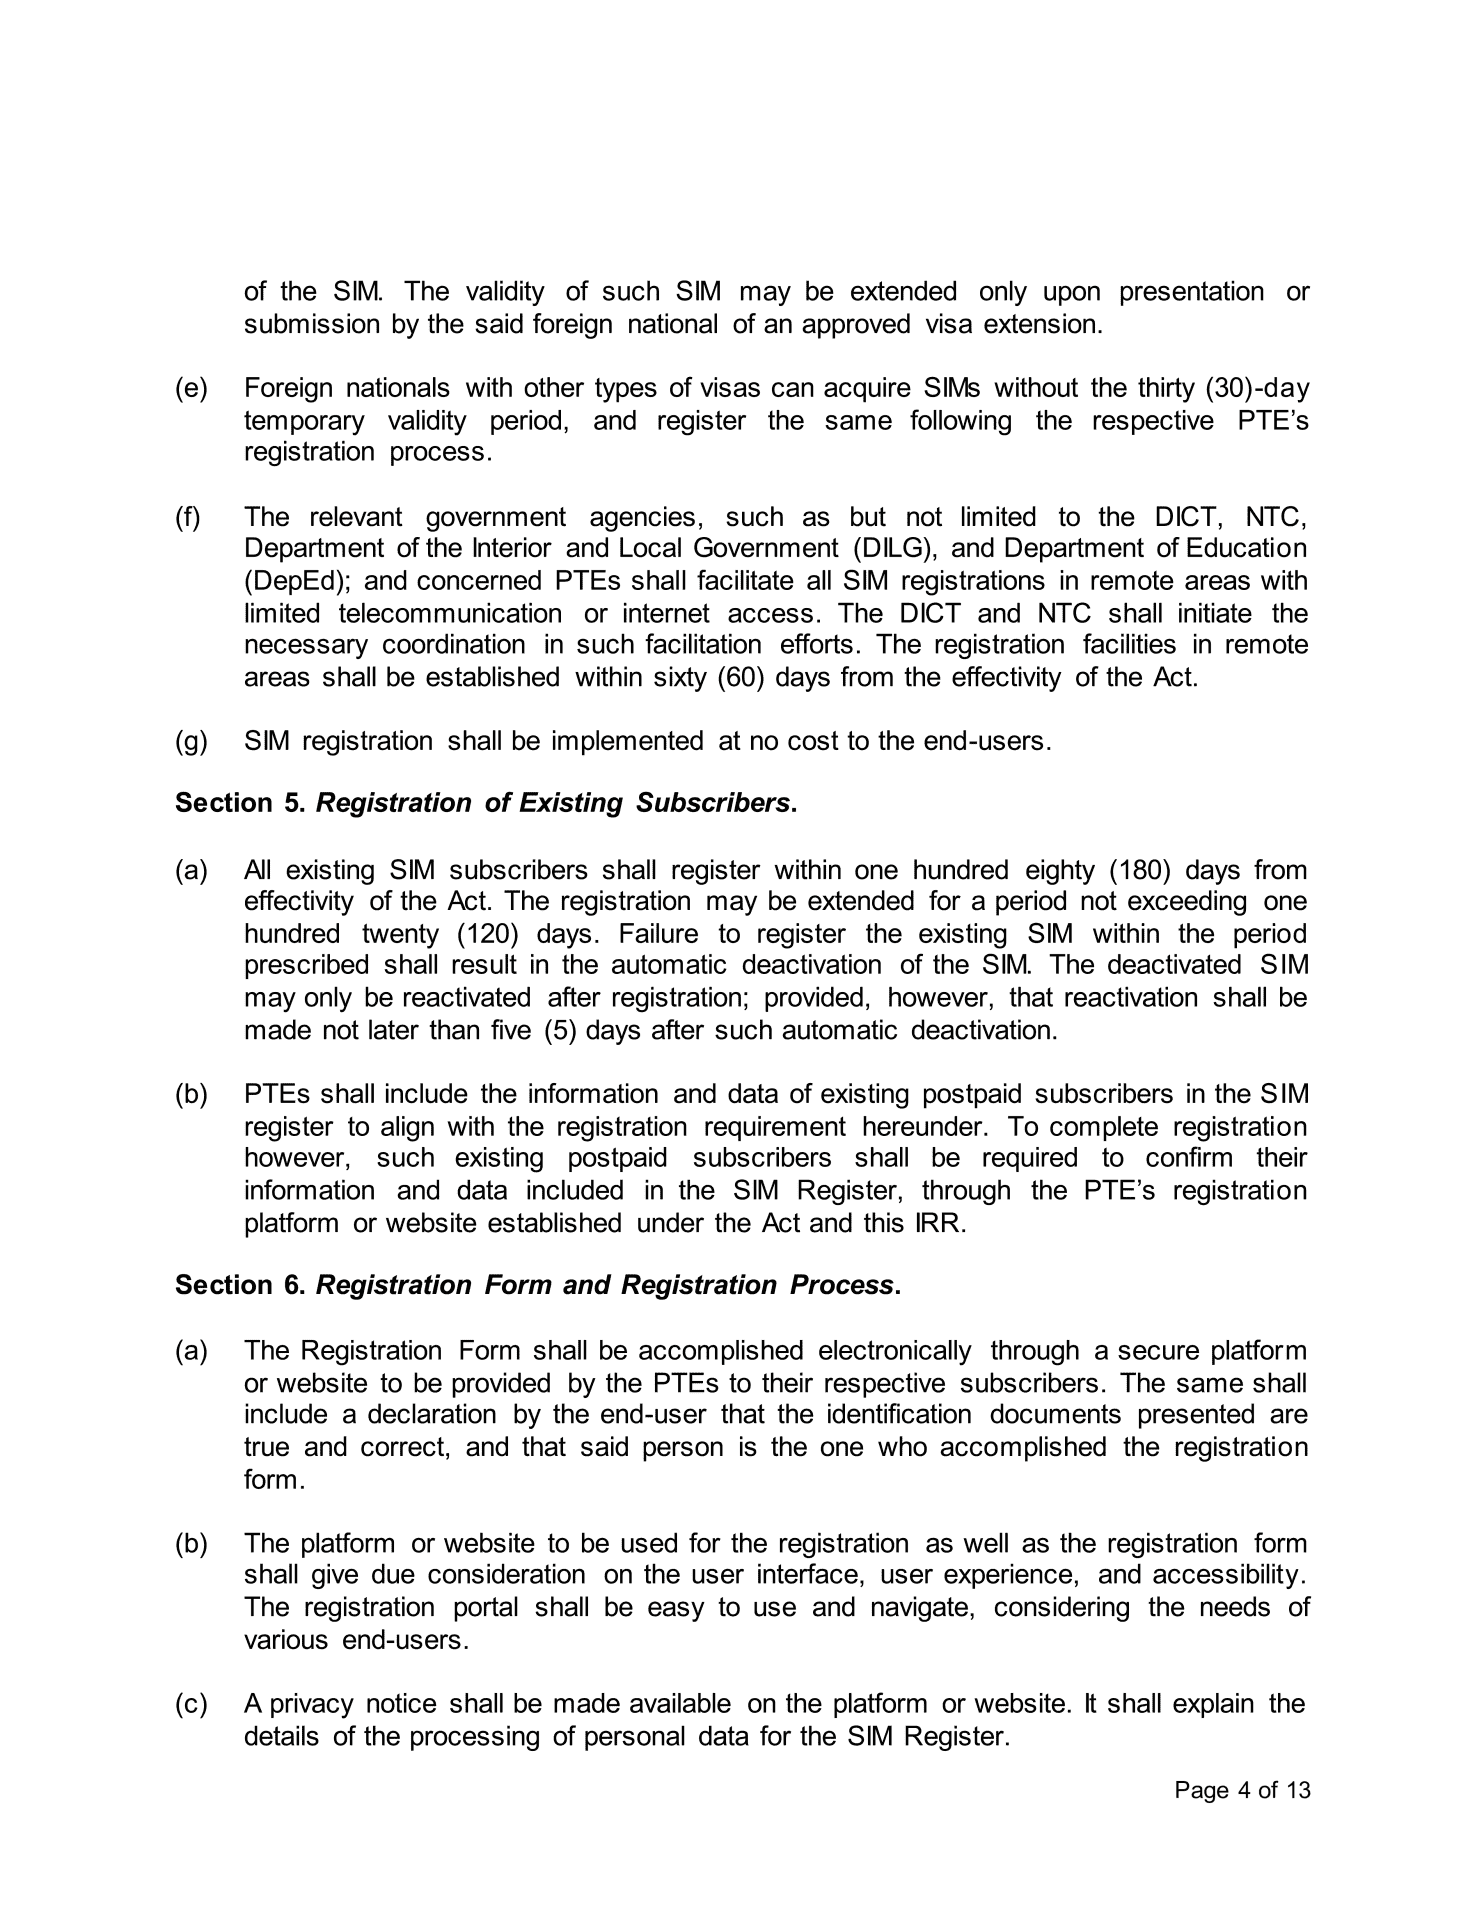 First-Full-Draft-of-the-IRR-for-RA-11934for-Public-Consultation_004.png